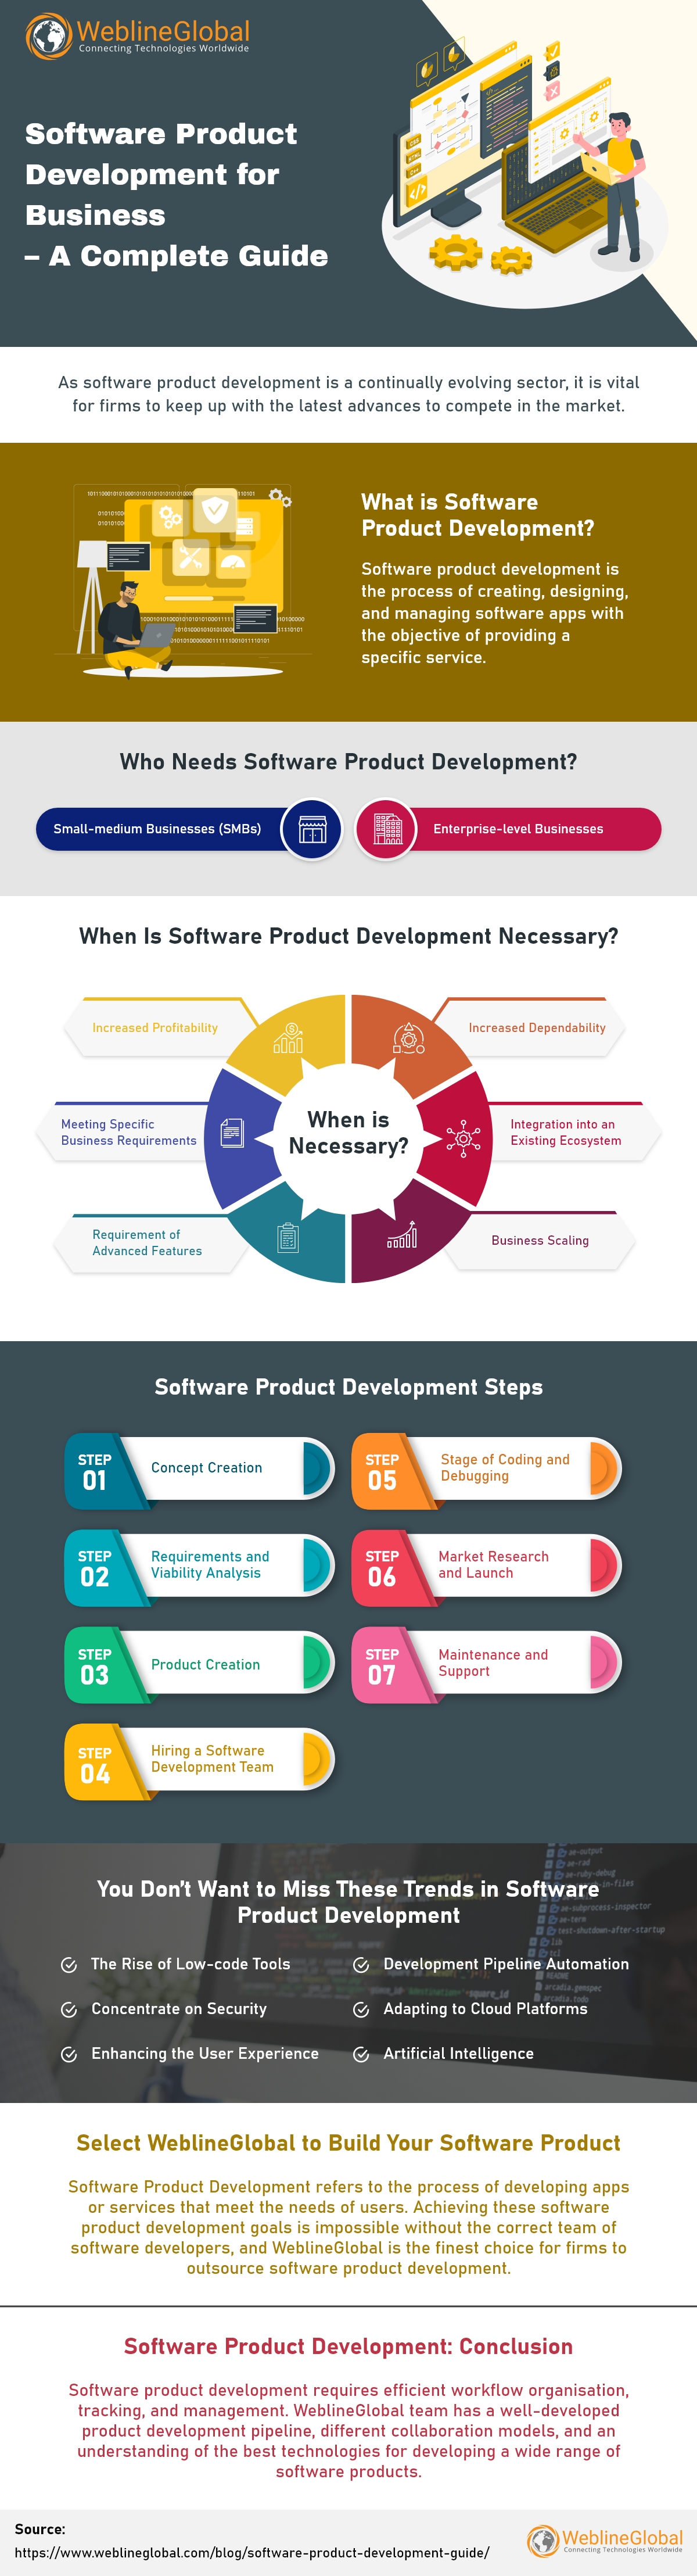 Software Product Development For Business Guide INFOGRAPHIC